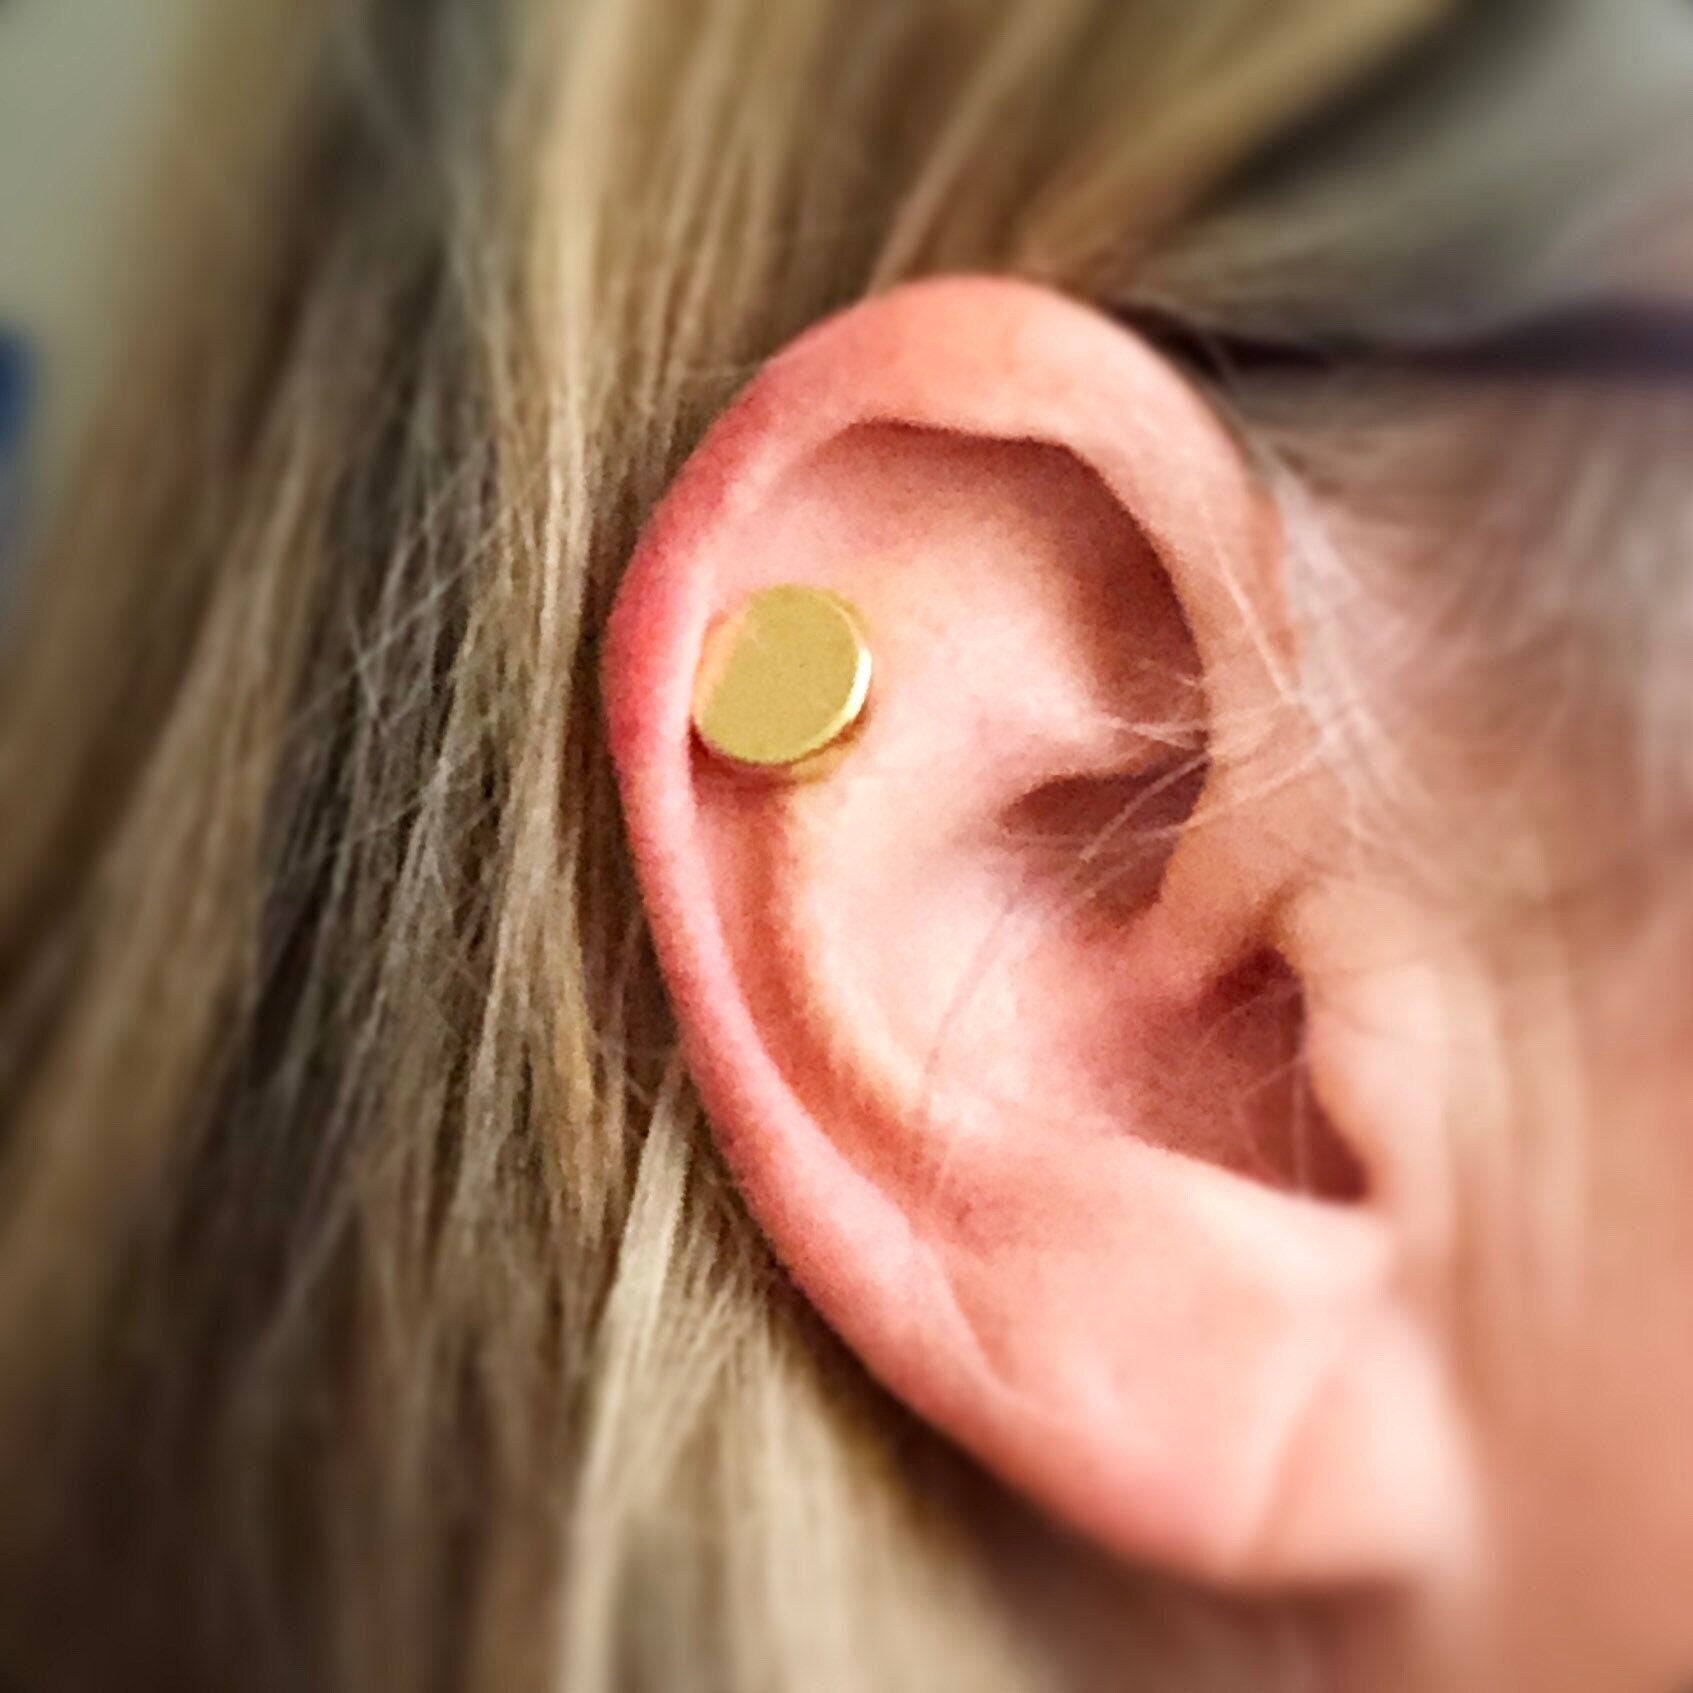 Keloid Magnetic Earrings offers strong pressure on the ear lobes.